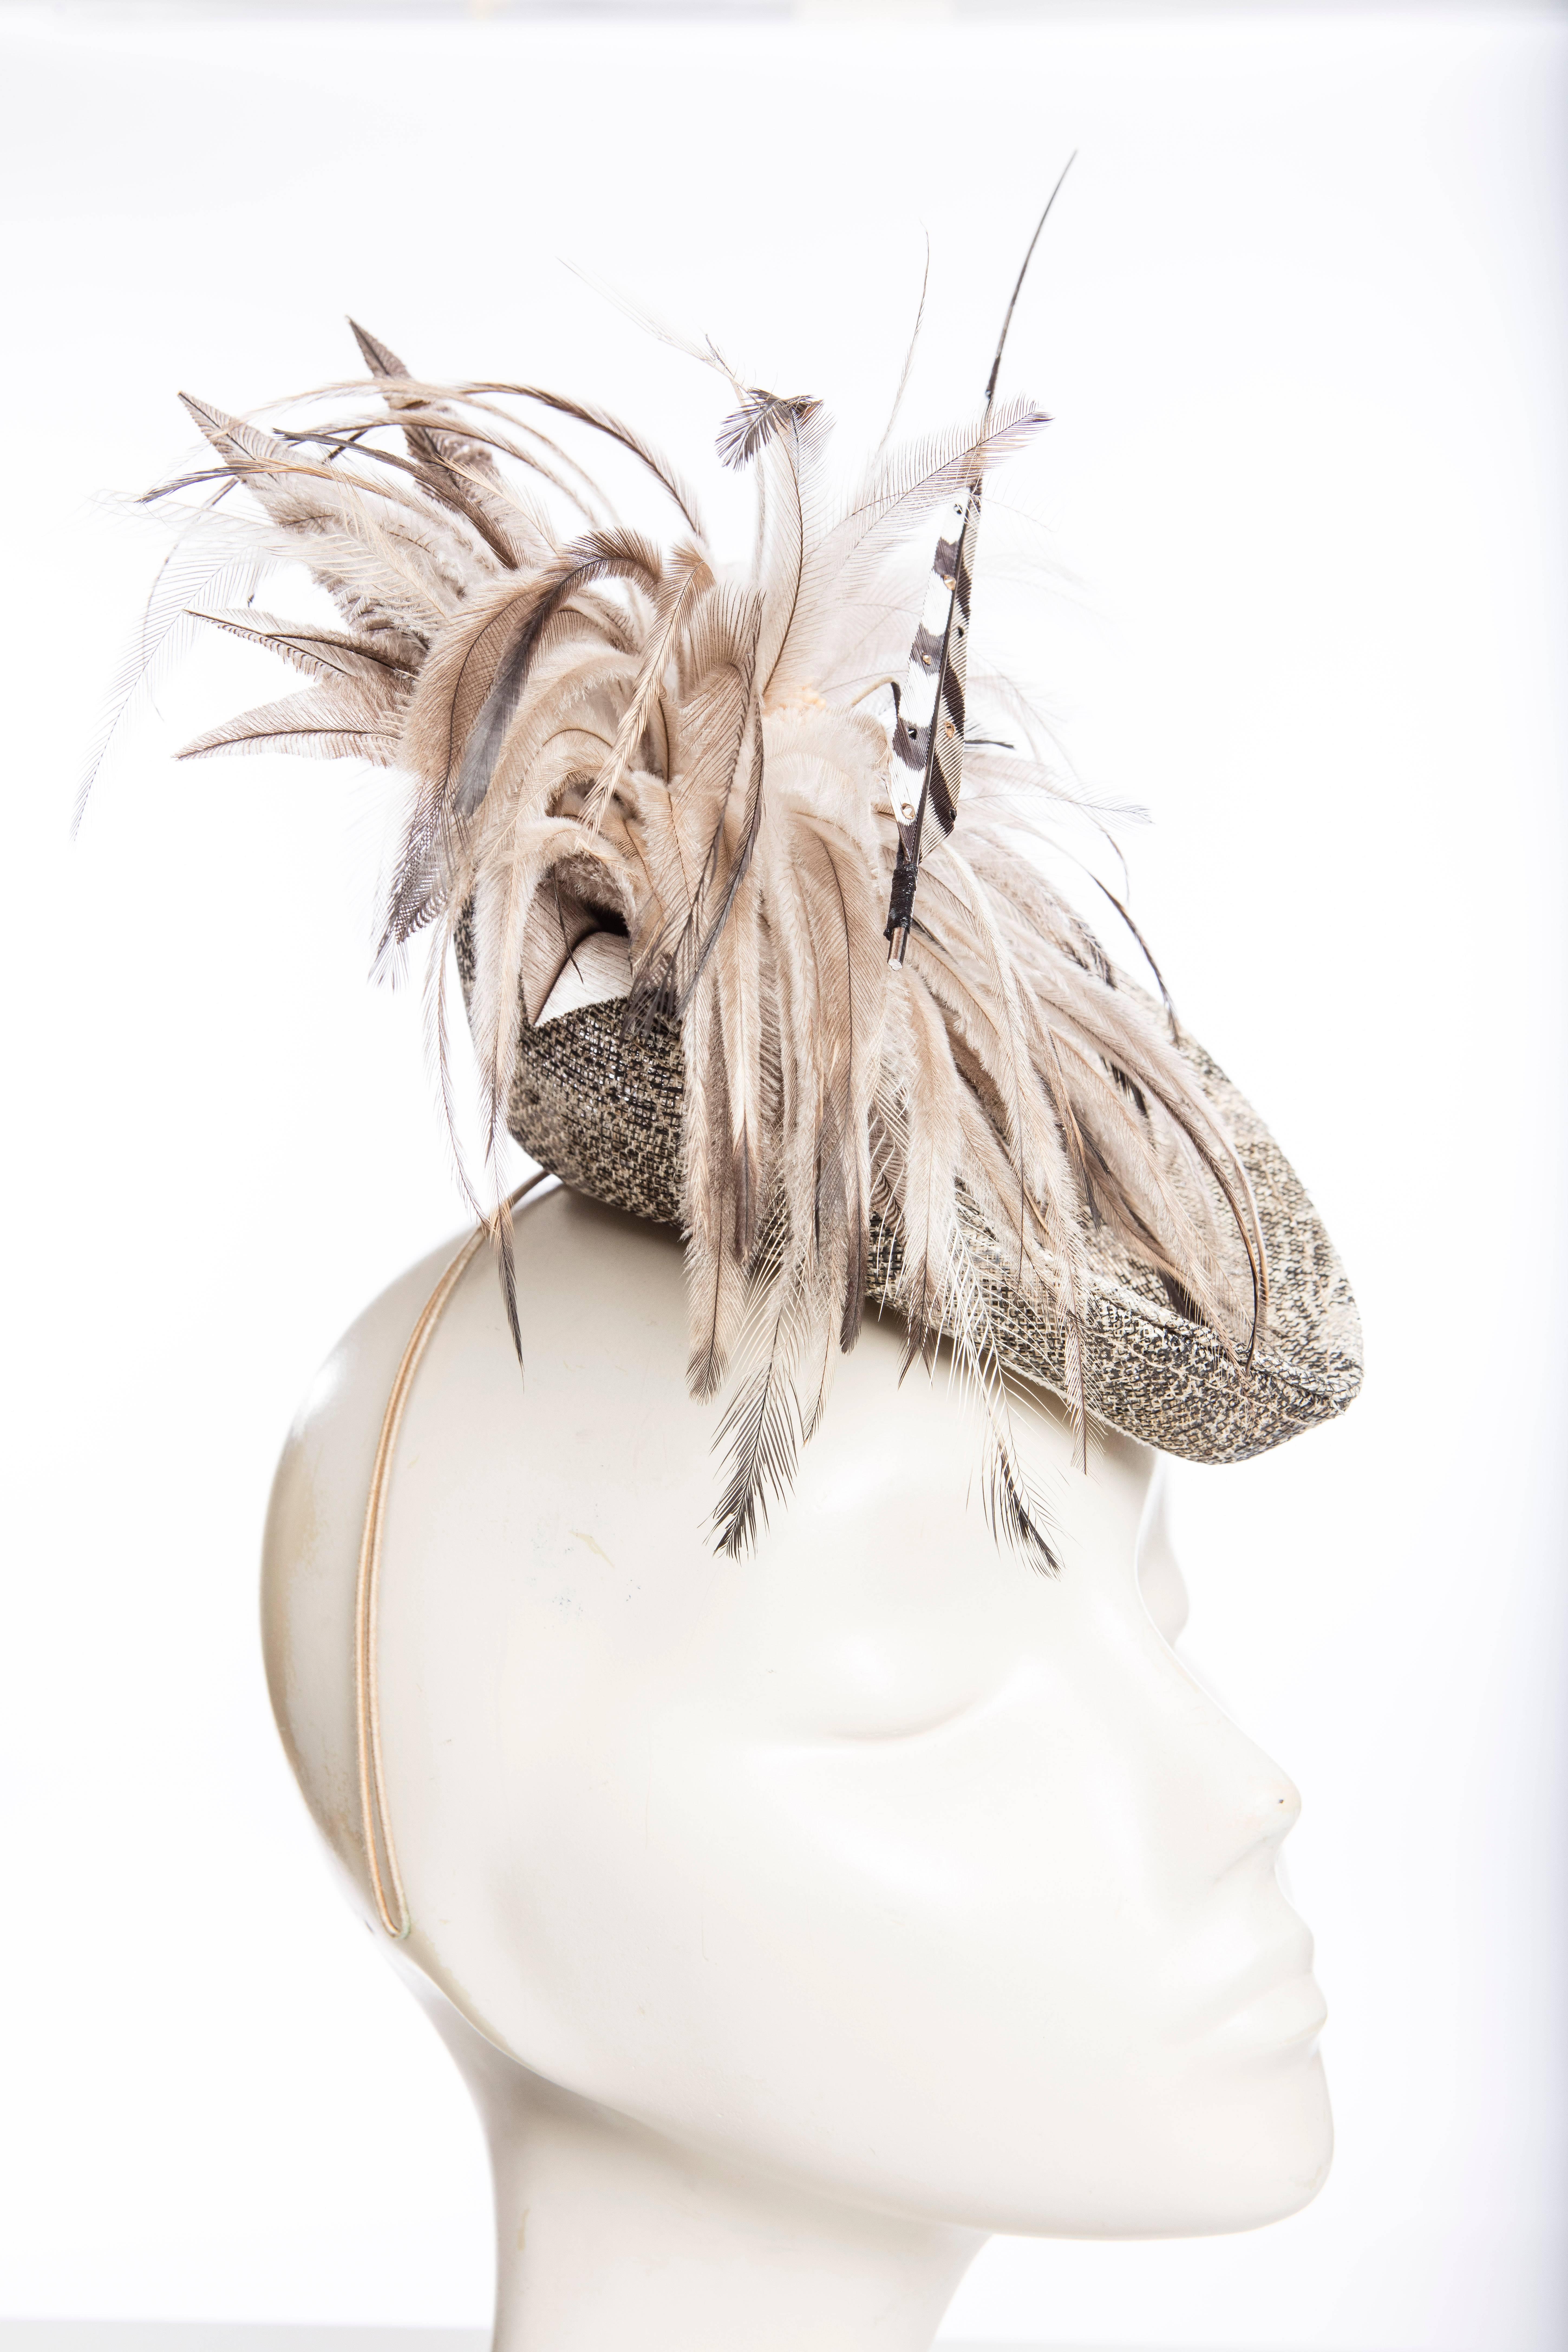 Philip Treacy Fascinator with feather appliqué at side and headband featuring concealed hair comb. Includes box.

Circumference 13.5”